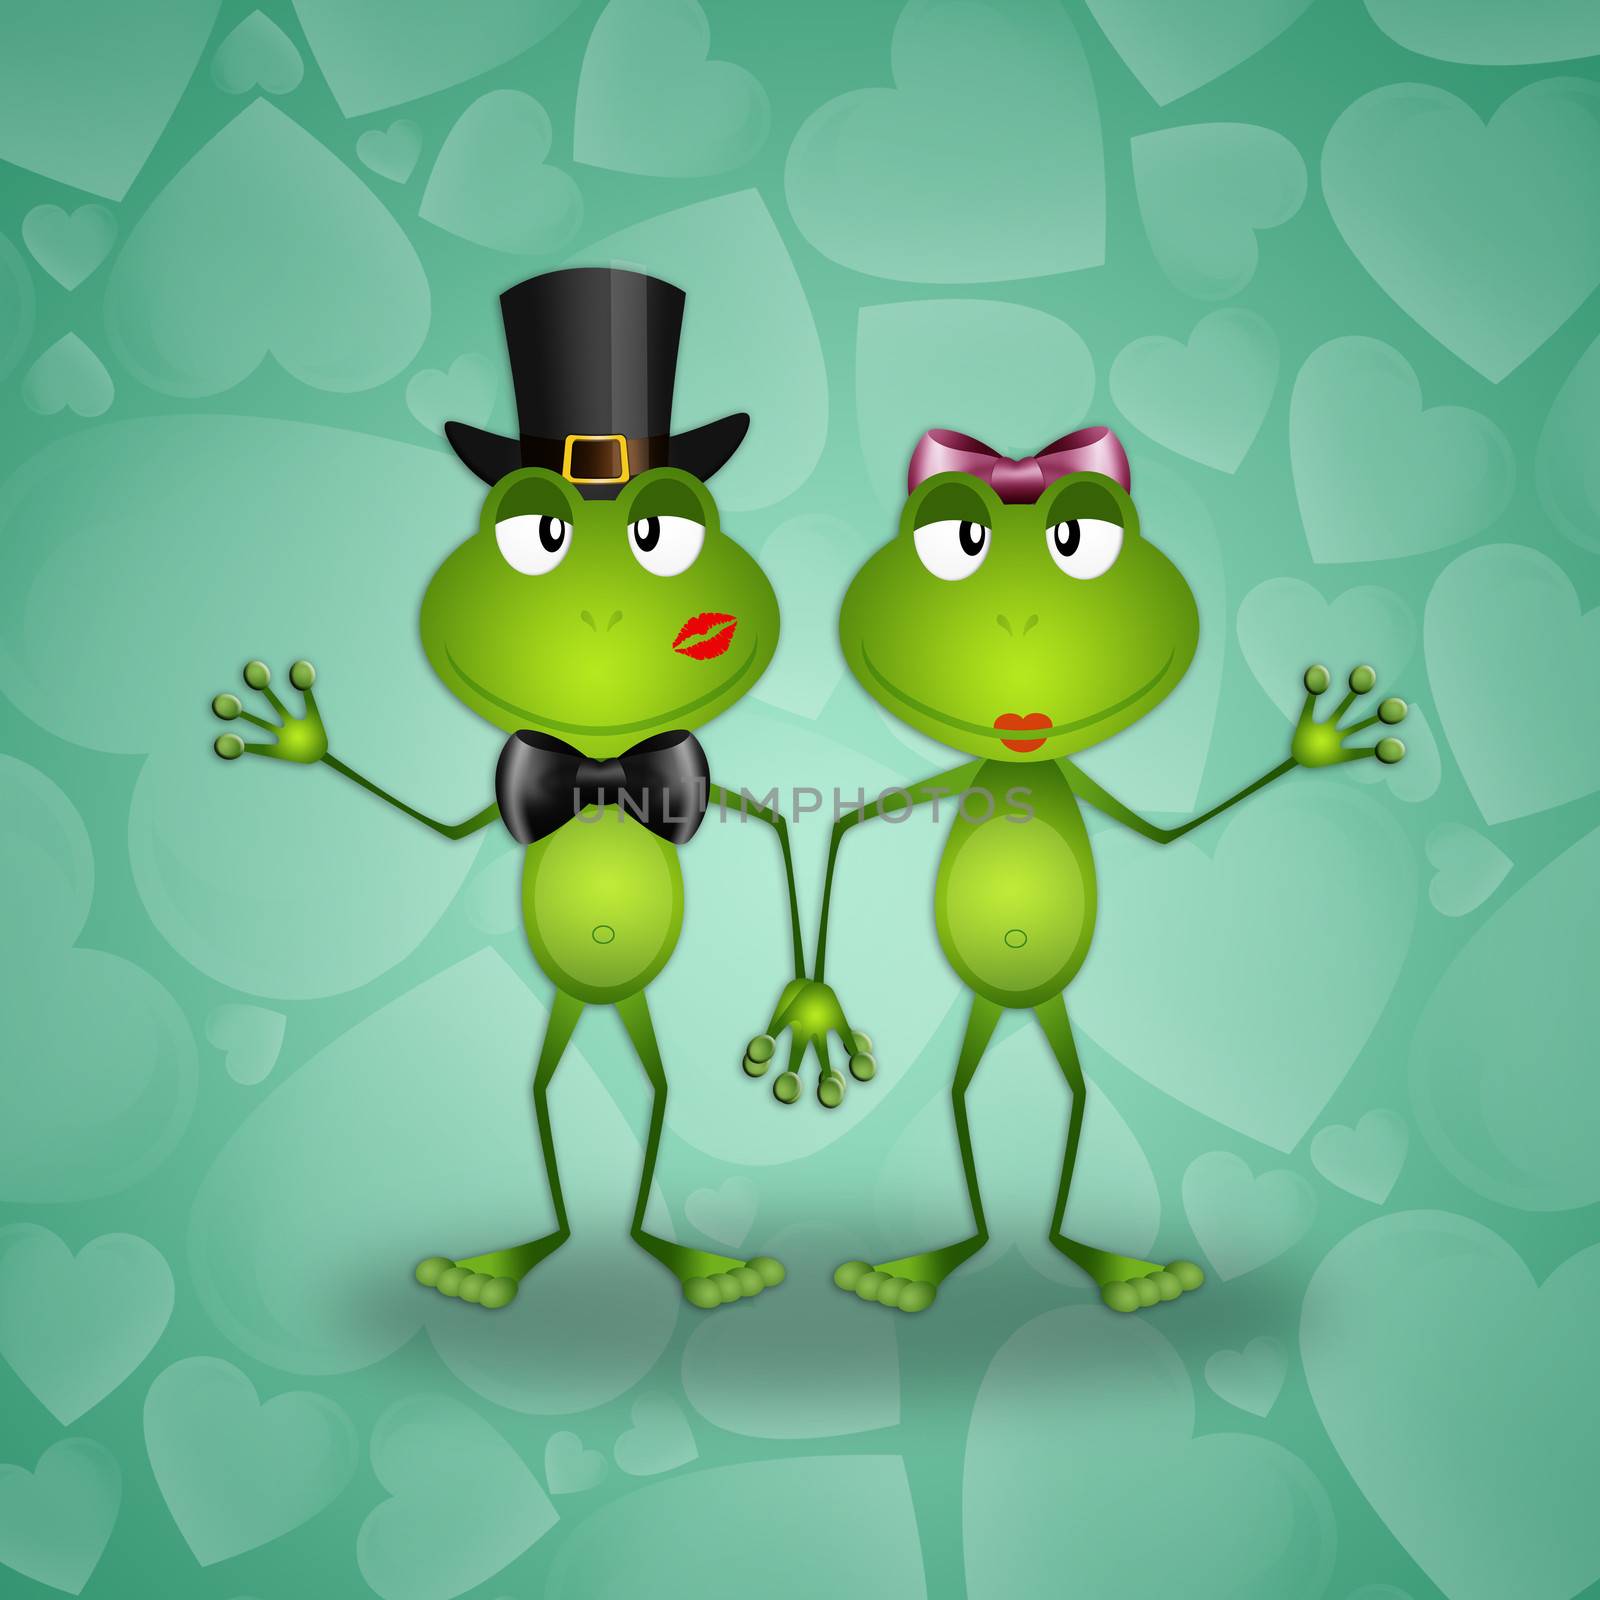 Two frogs in love by sognolucido